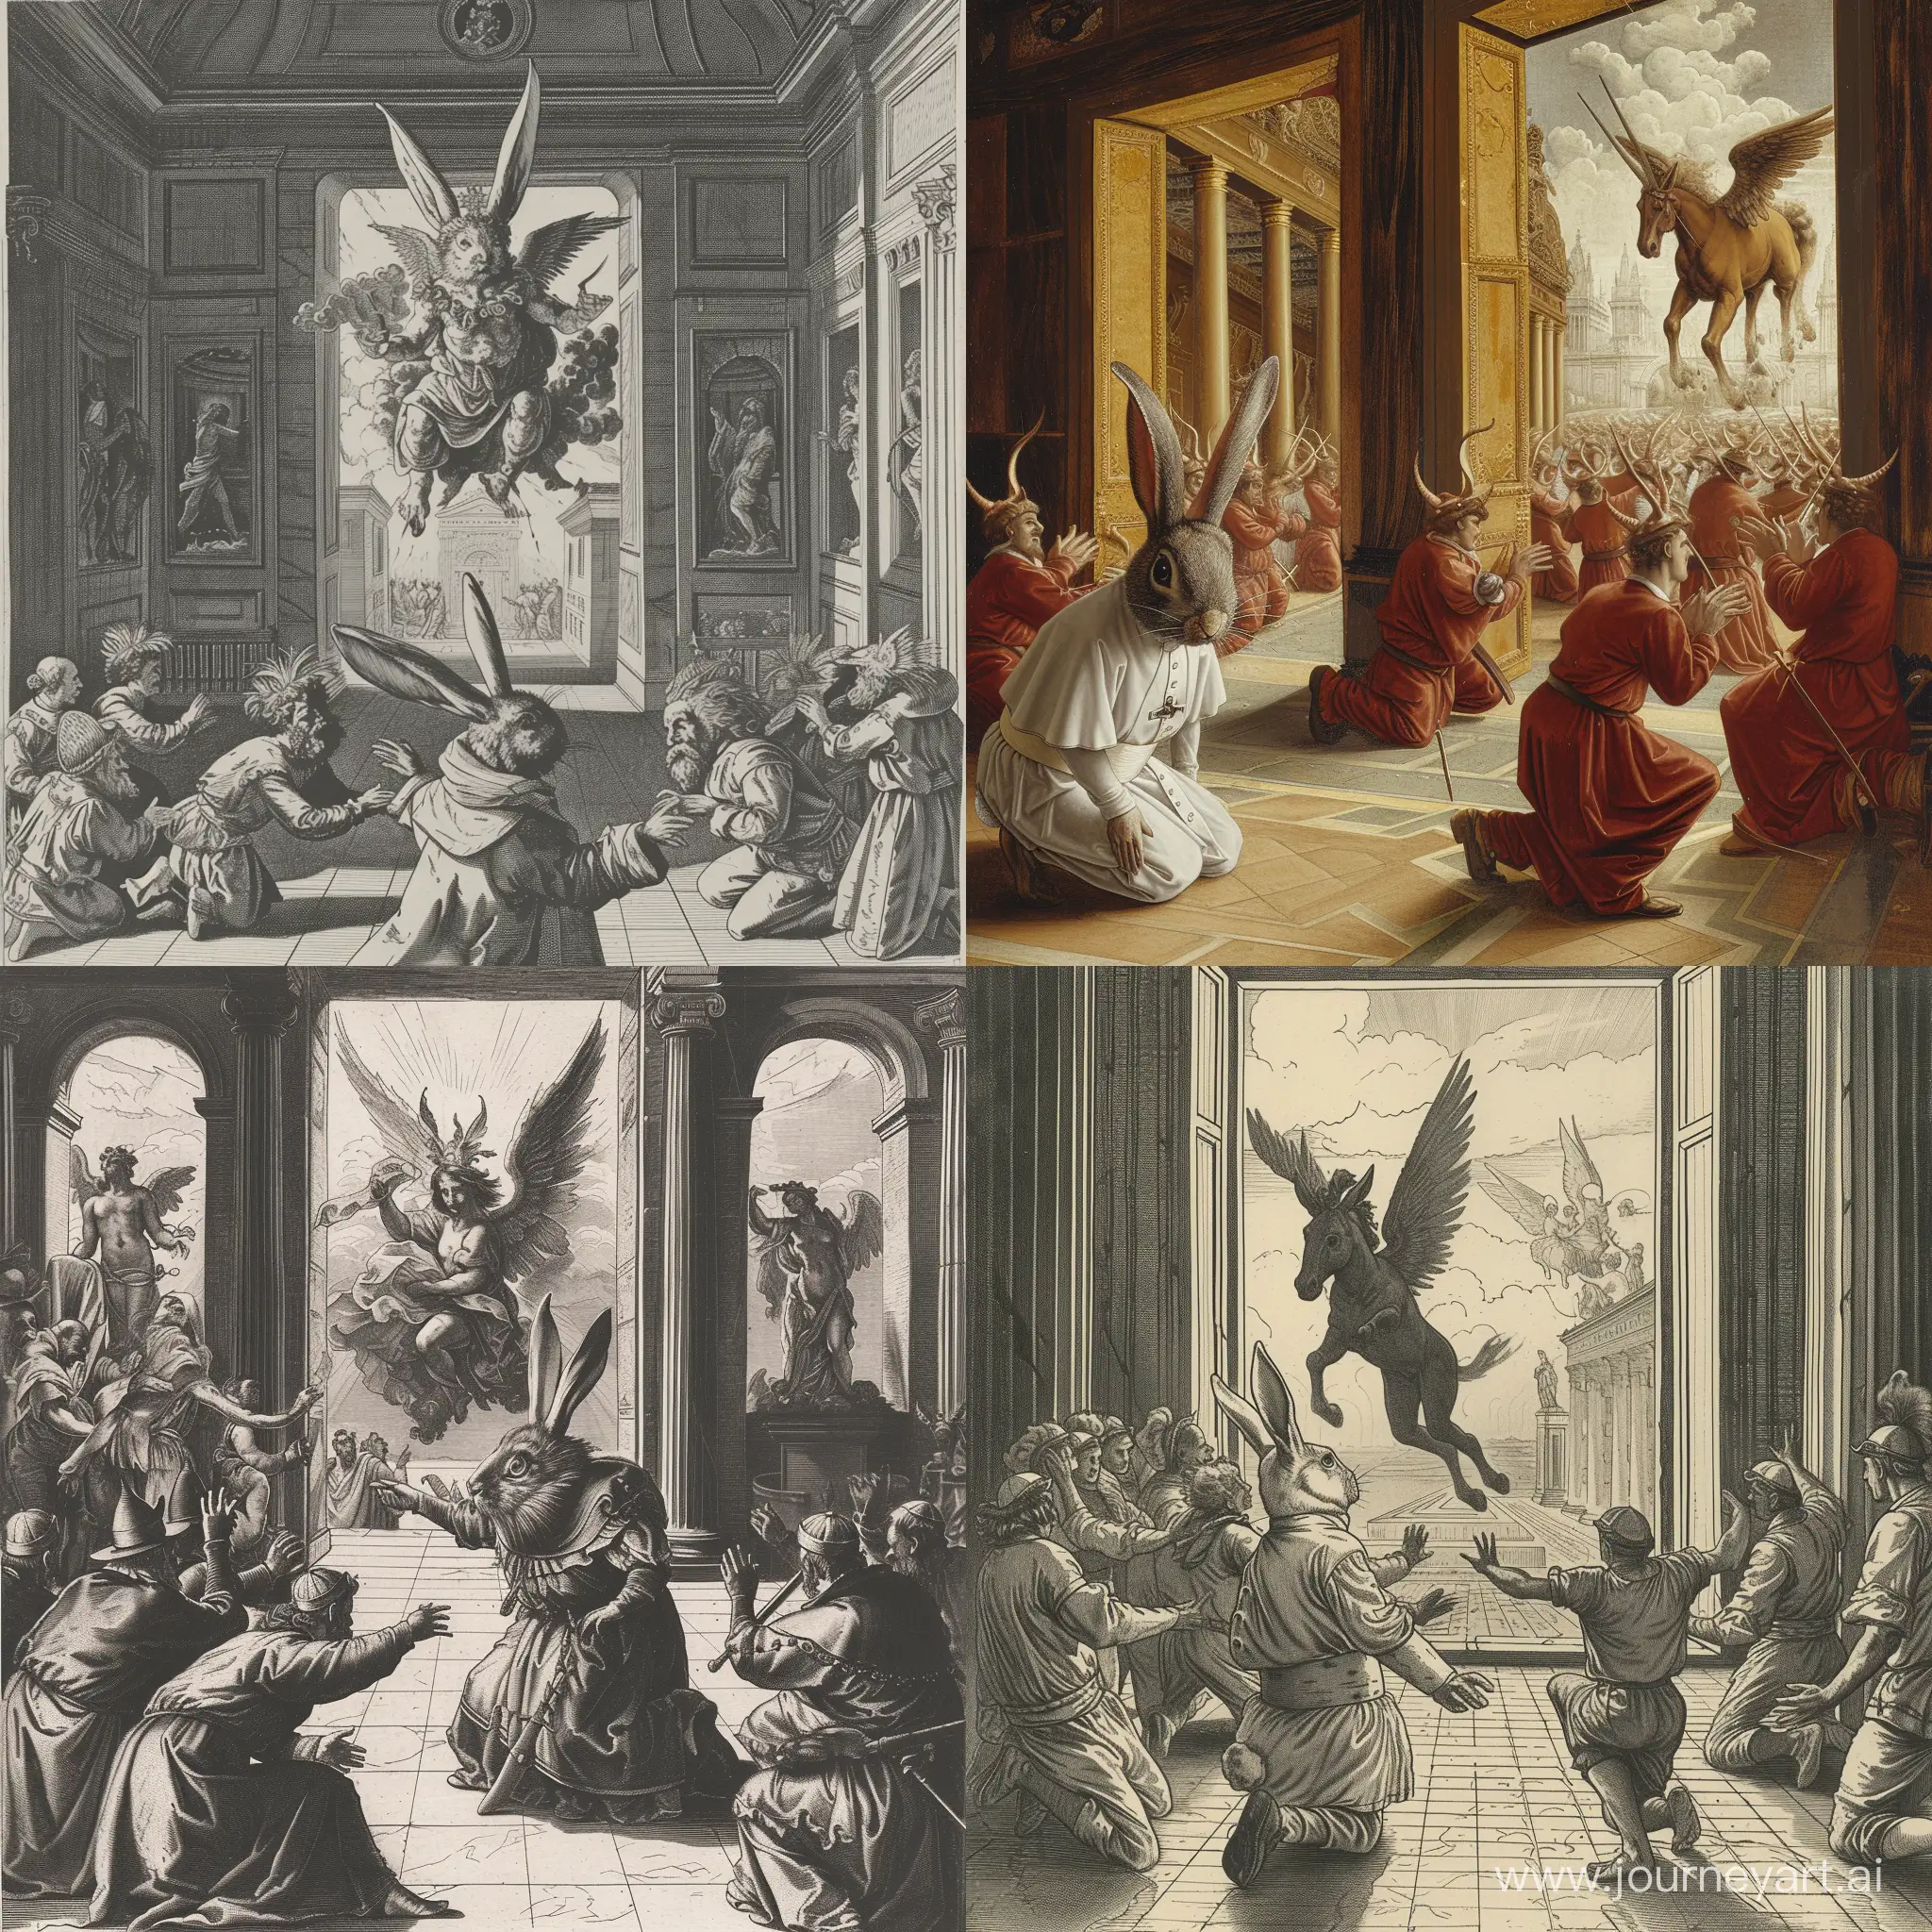 The pope if he was a rabbit, several ruffians kneeling in supplication, the inside of a temple, an angel bursting through one window, a centaur bursting through another window.